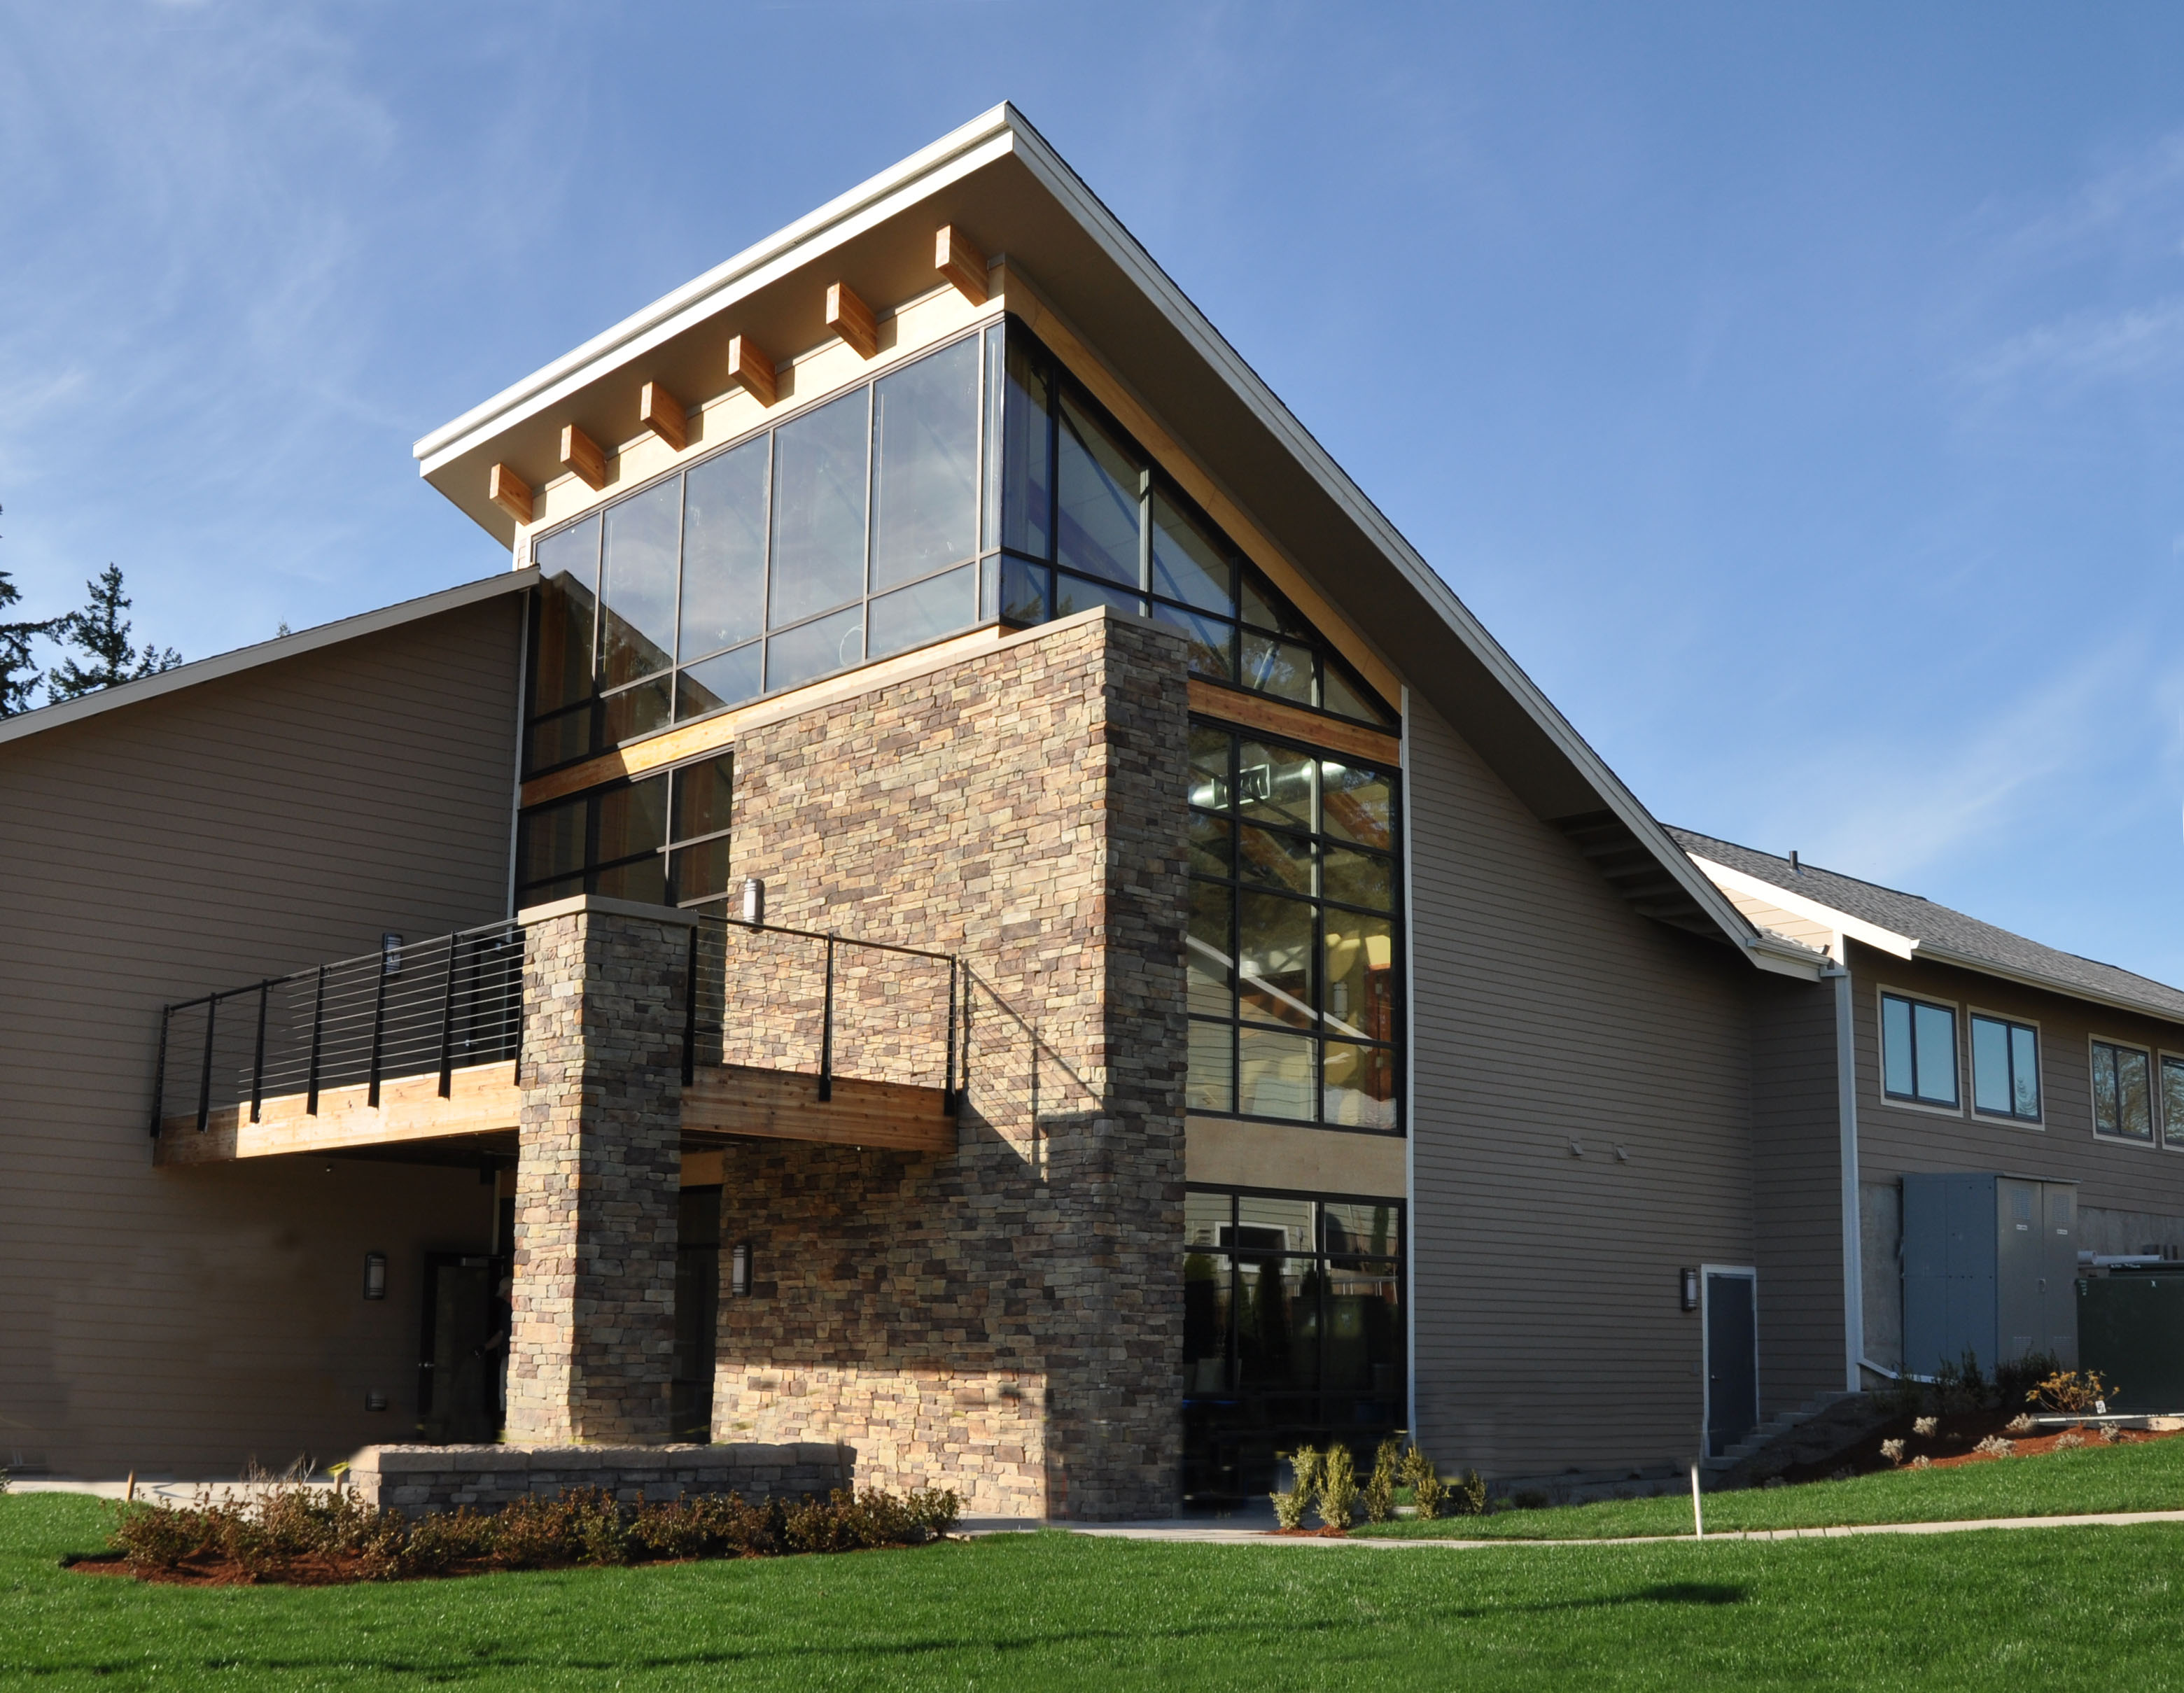 An outside view of the Newberg treatment center